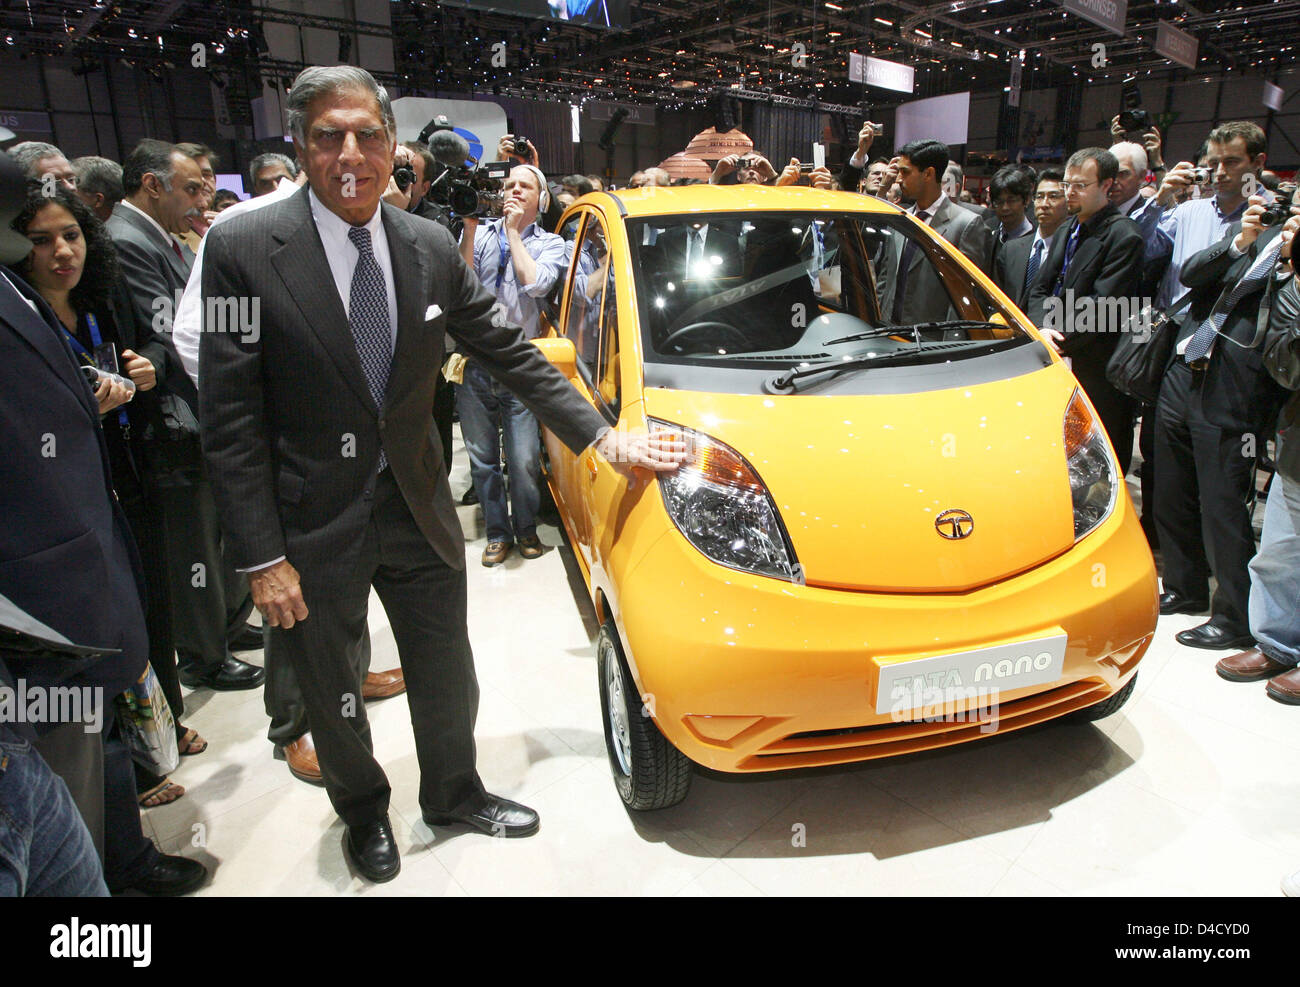 TATA boss Ratan Tata presents the TATA Nano at the press day to the 78th International Motor Show Geneva, Switzerland, 04 March 2008. Some 260 exhibitors from 30 nations showcase on 77,550 square metres their latest developments at the 78th International Motor Show Geneva running from 06 through 16 March. Photo: ULI DECK Stock Photo